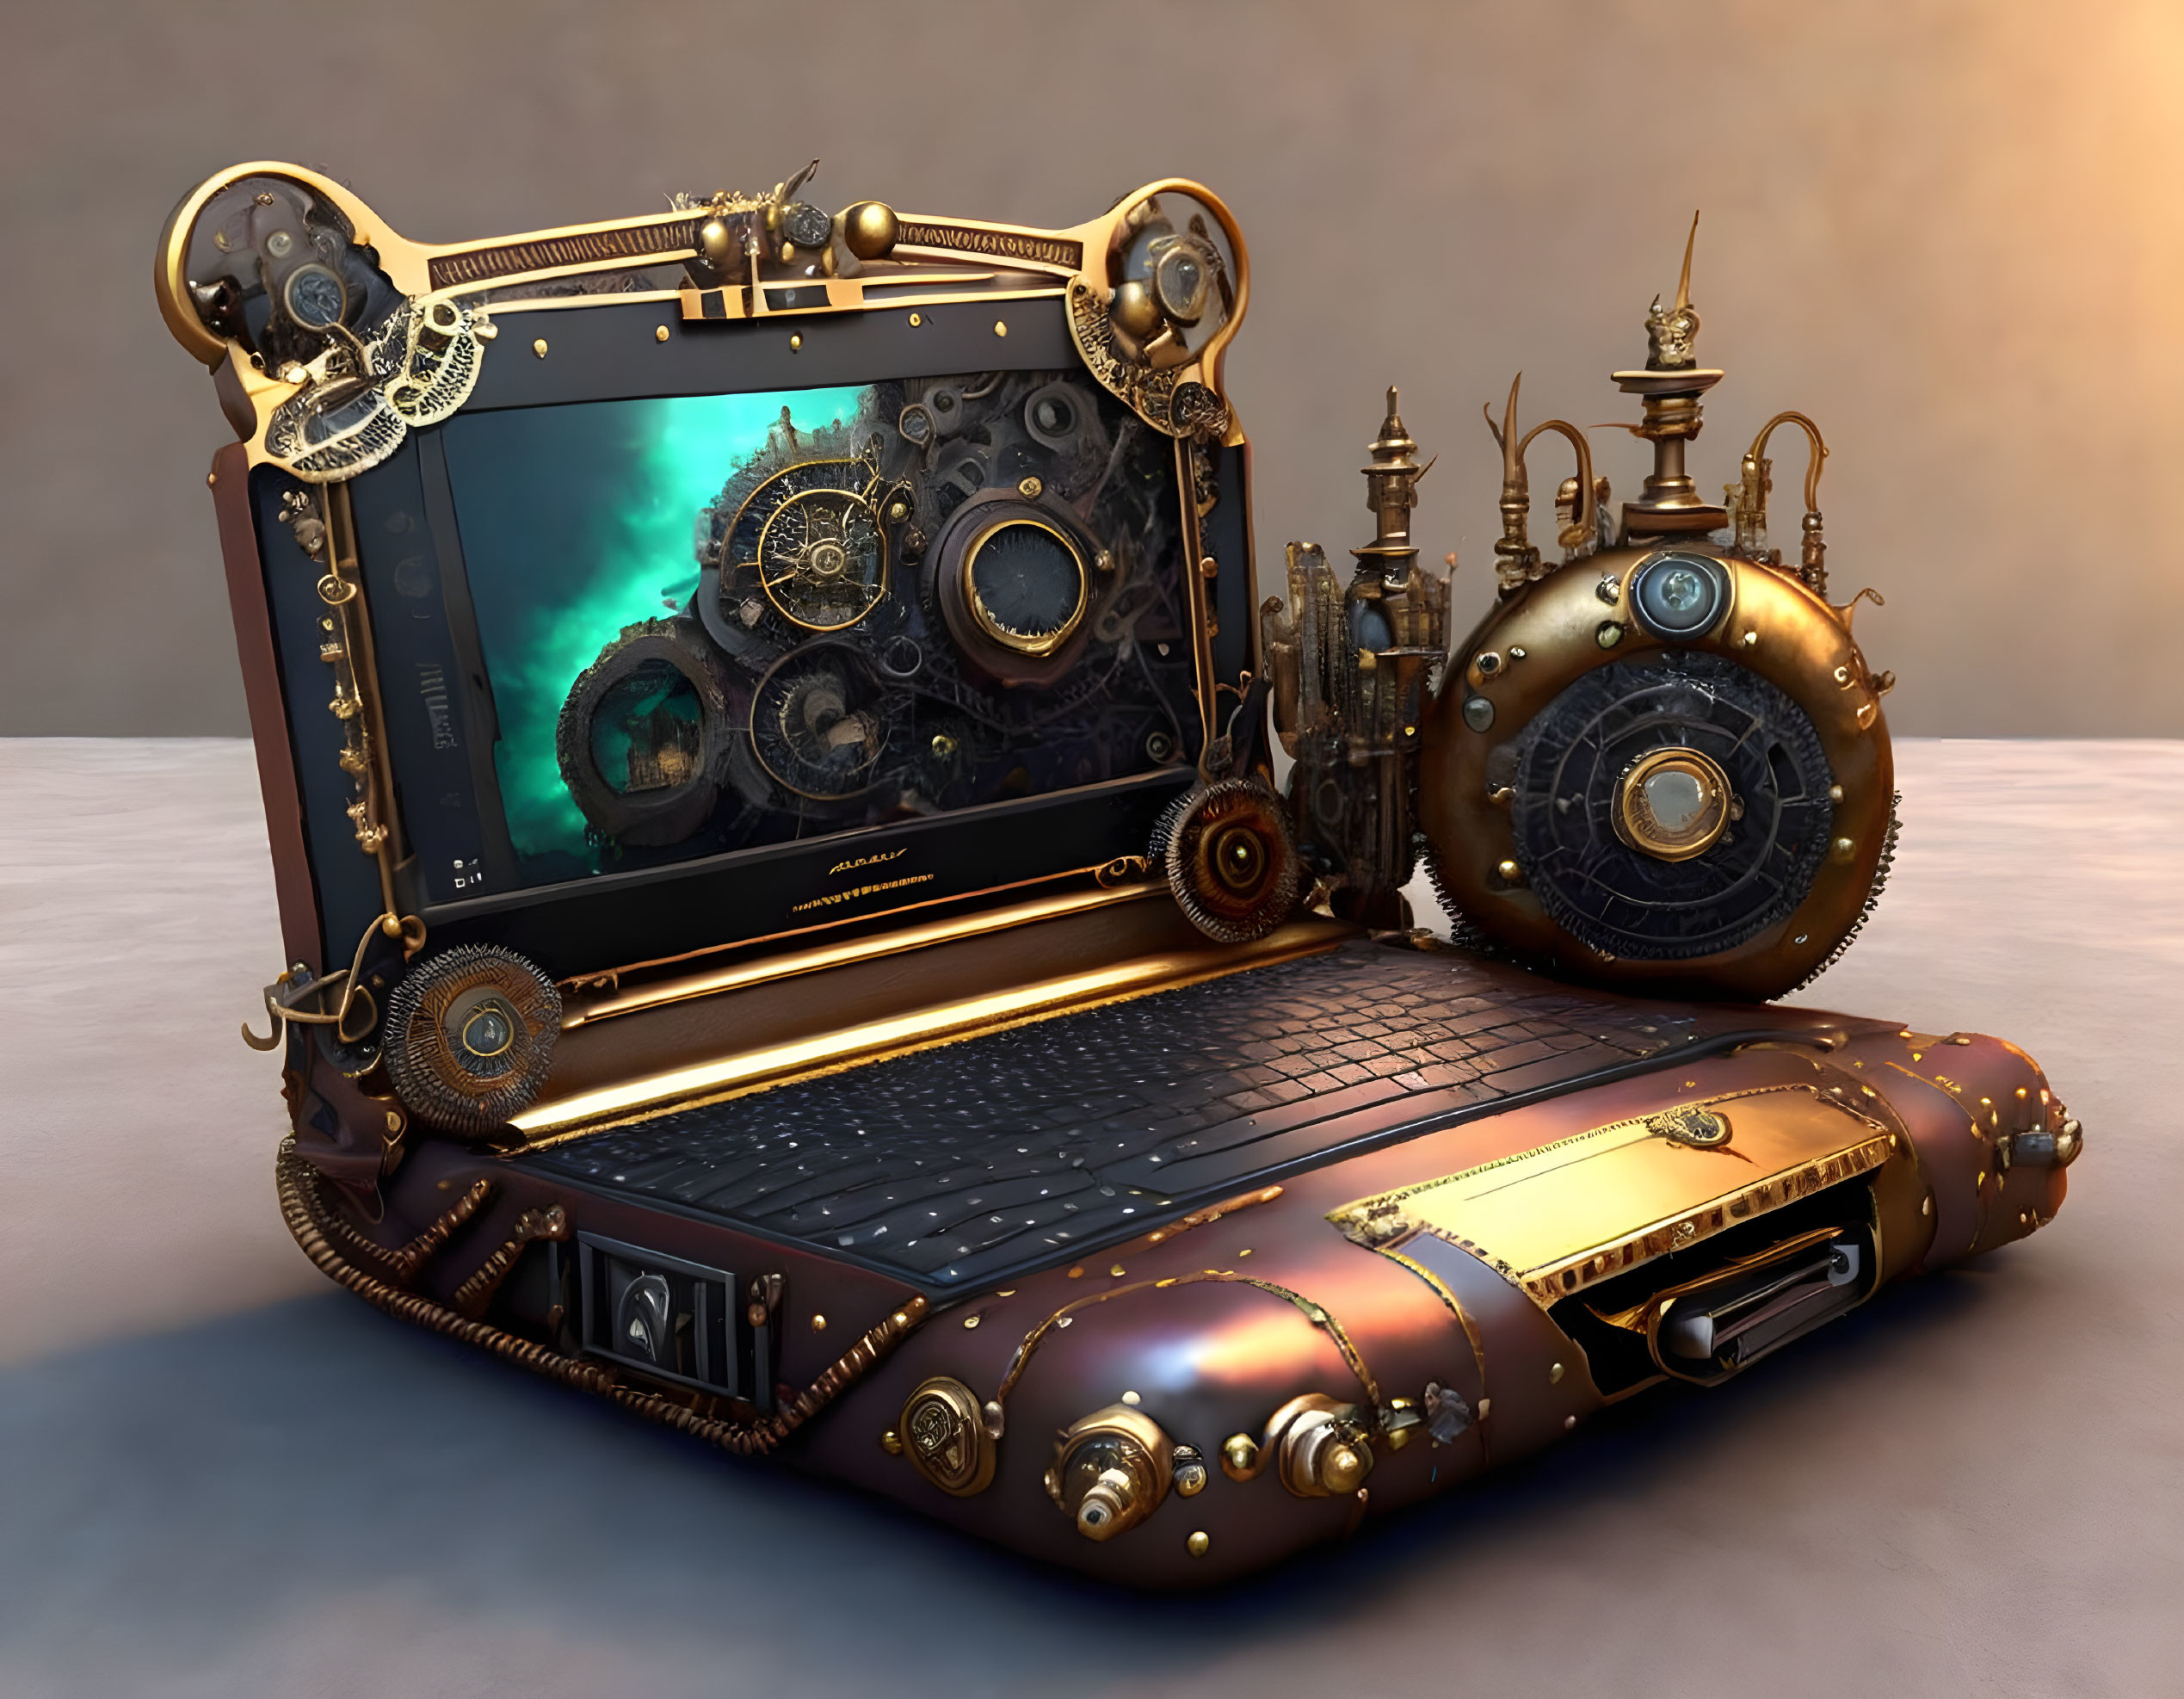 Steampunk-inspired laptop with metallic gears and ornate gold designs.